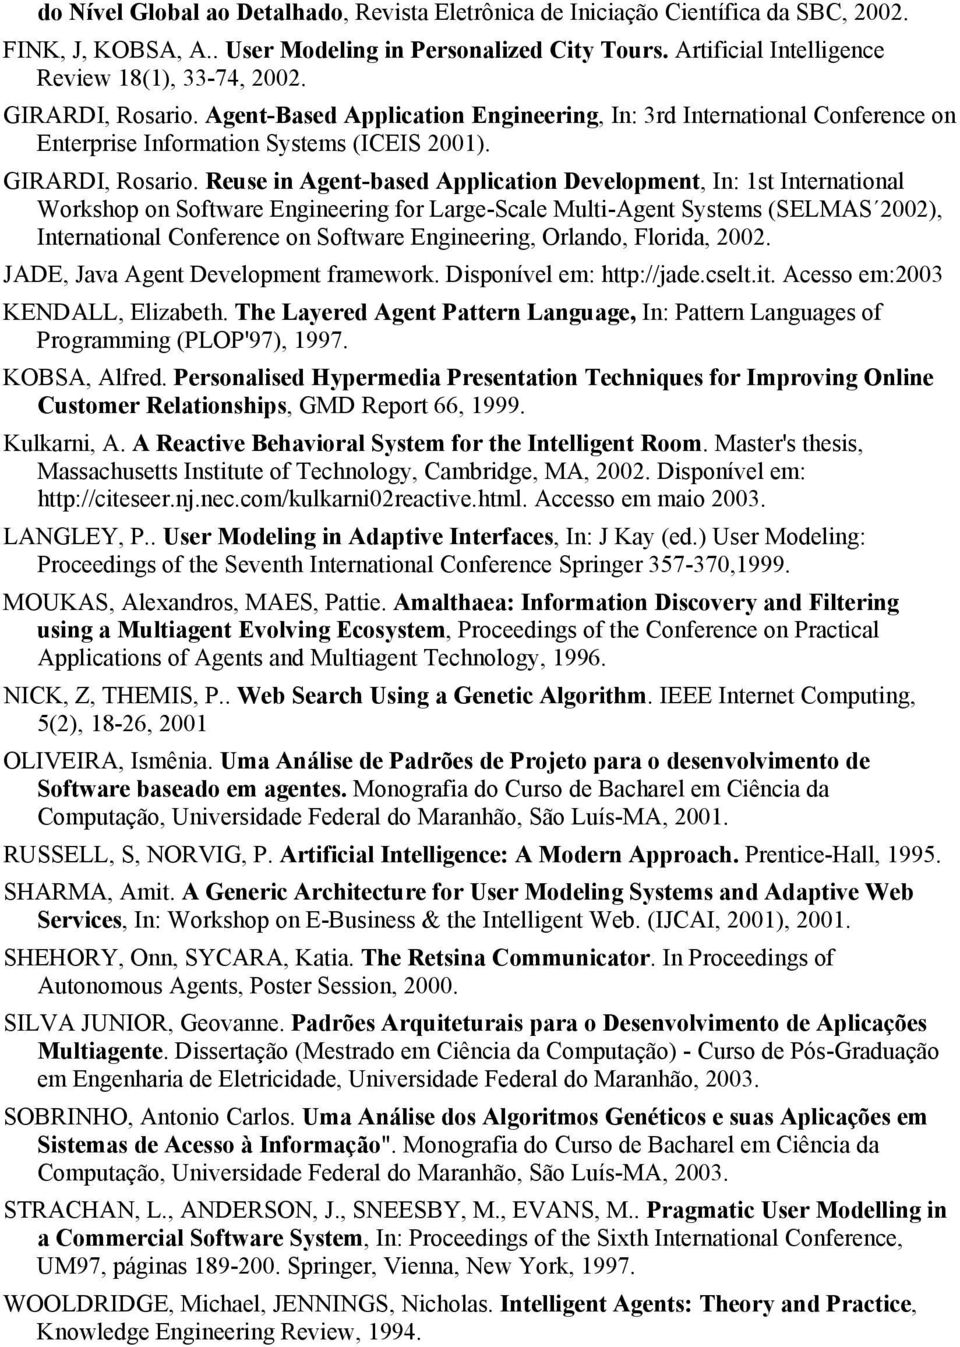 Reuse in Agent-based Application Development, In: 1st International Workshop on Software Engineering for Large-Scale Multi-Agent Systems (SELMAS 2002), International Conference on Software